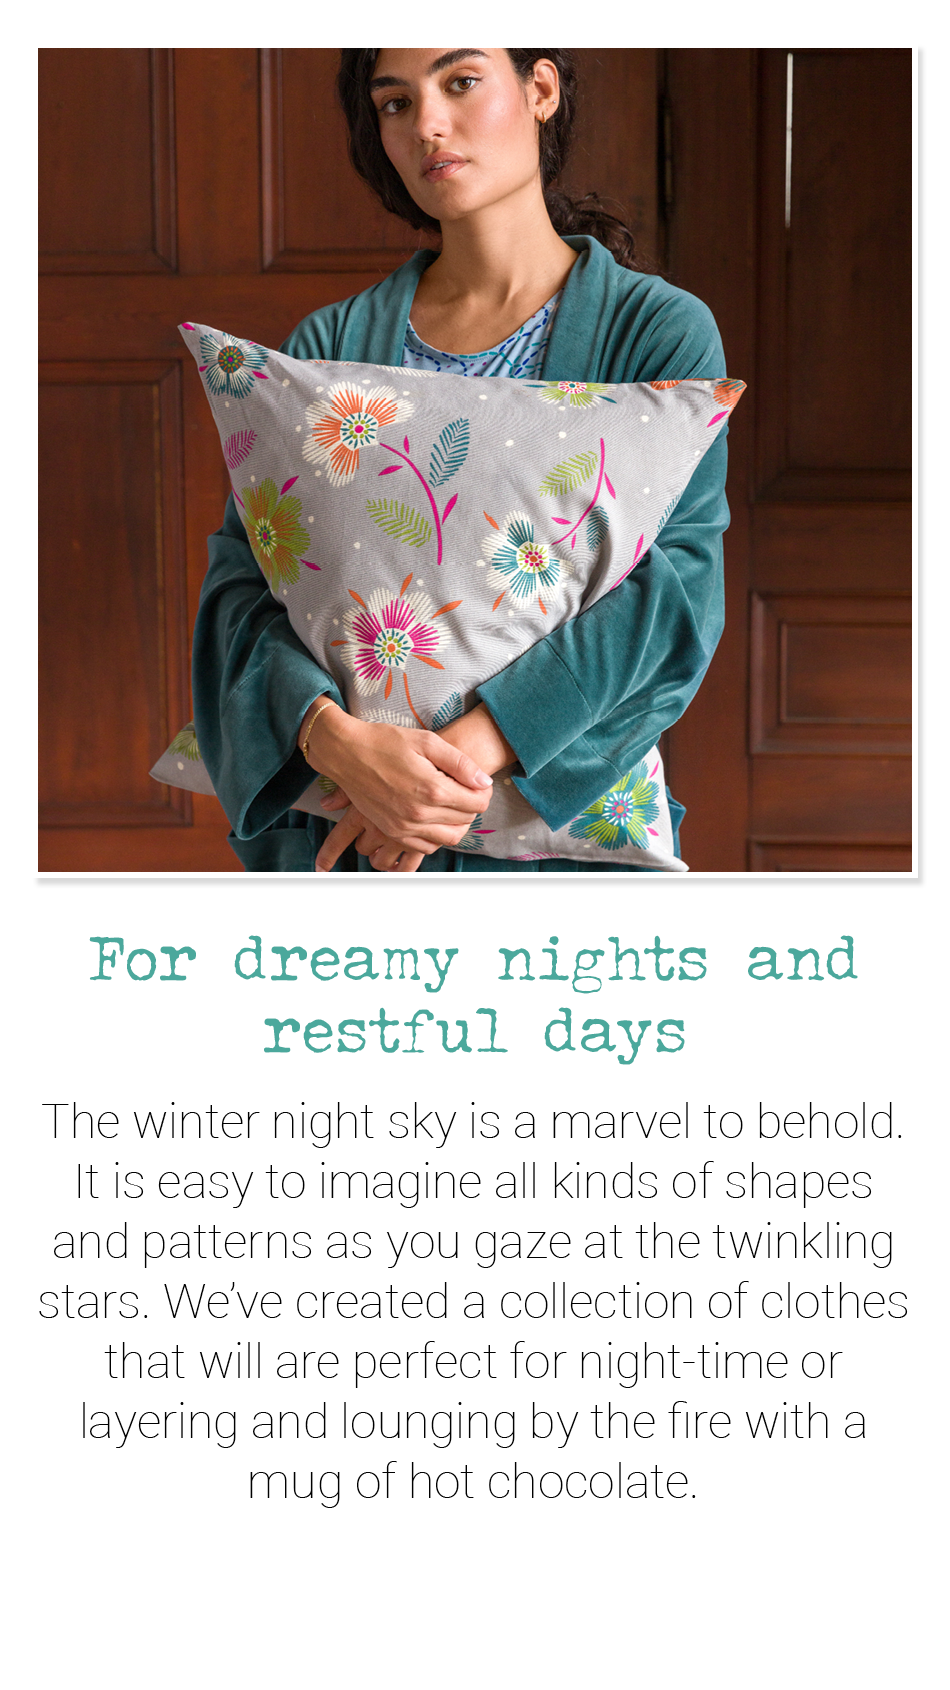 For dreamy nights and restful days